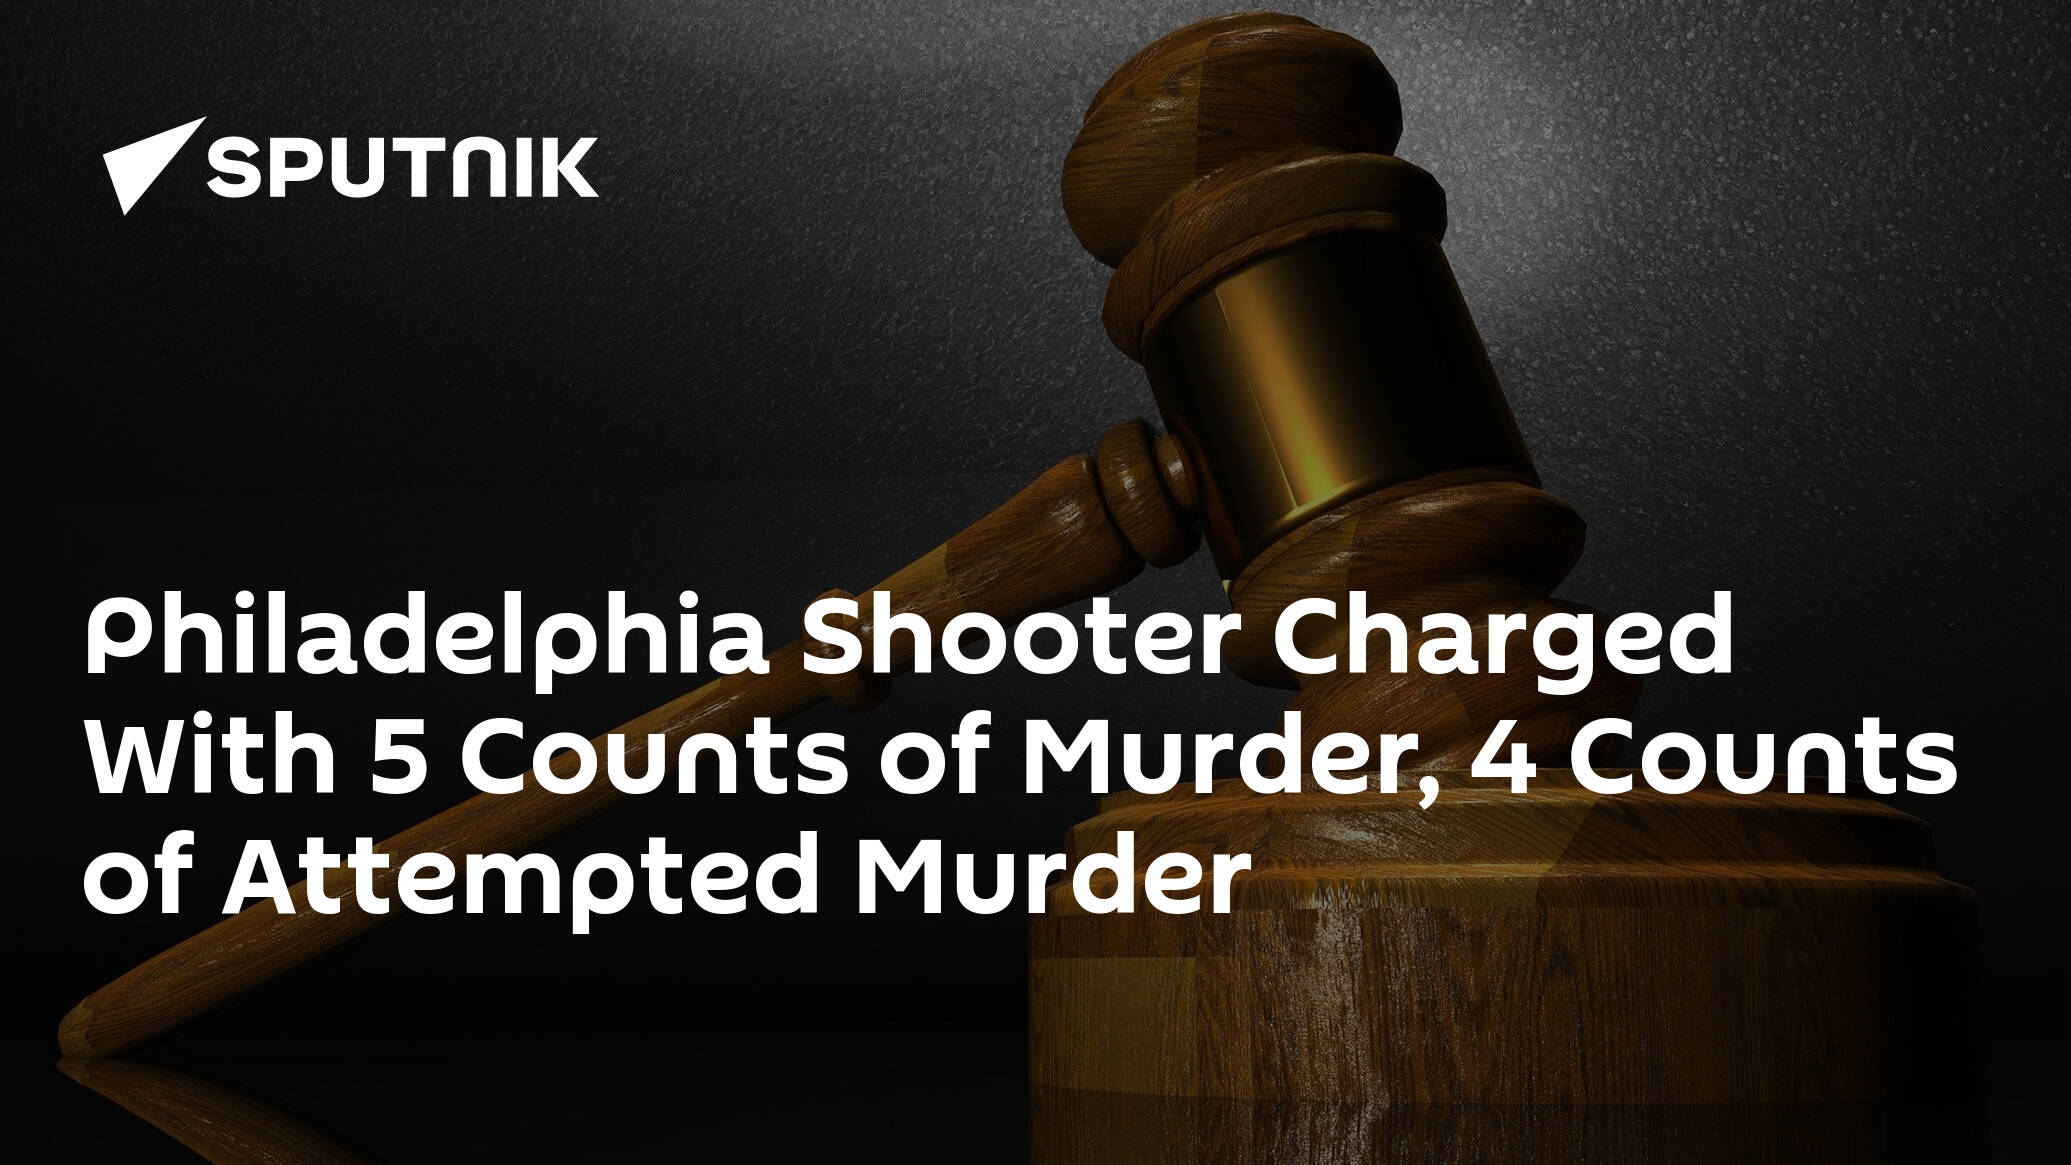 Philadelphia Shooter Charged With 5 Counts of Murder, 4 Counts of Attempted Murder